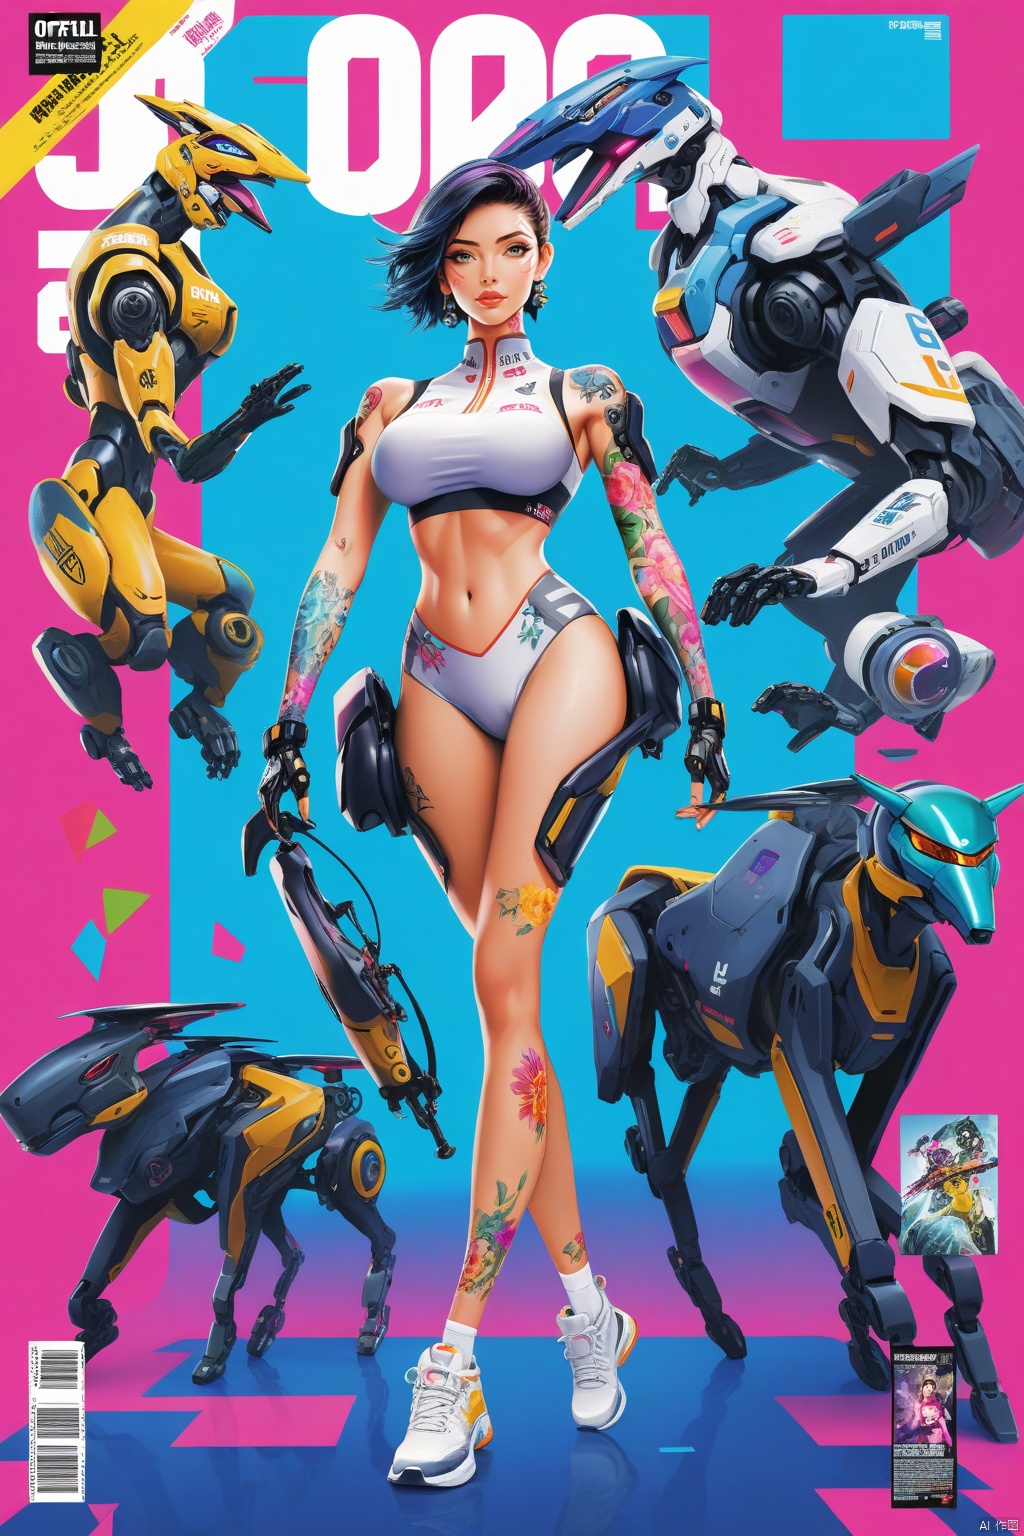  offcial art, colorful, Colorful background, splash of color
A beautiful woman with delicate facial features, sportswear,(mecha style), big breasts, full body portrait, tattoo all over body, flower arms, Surrounded by strange Animal stitched puppets, movie perspective, advertising style, magazine cover